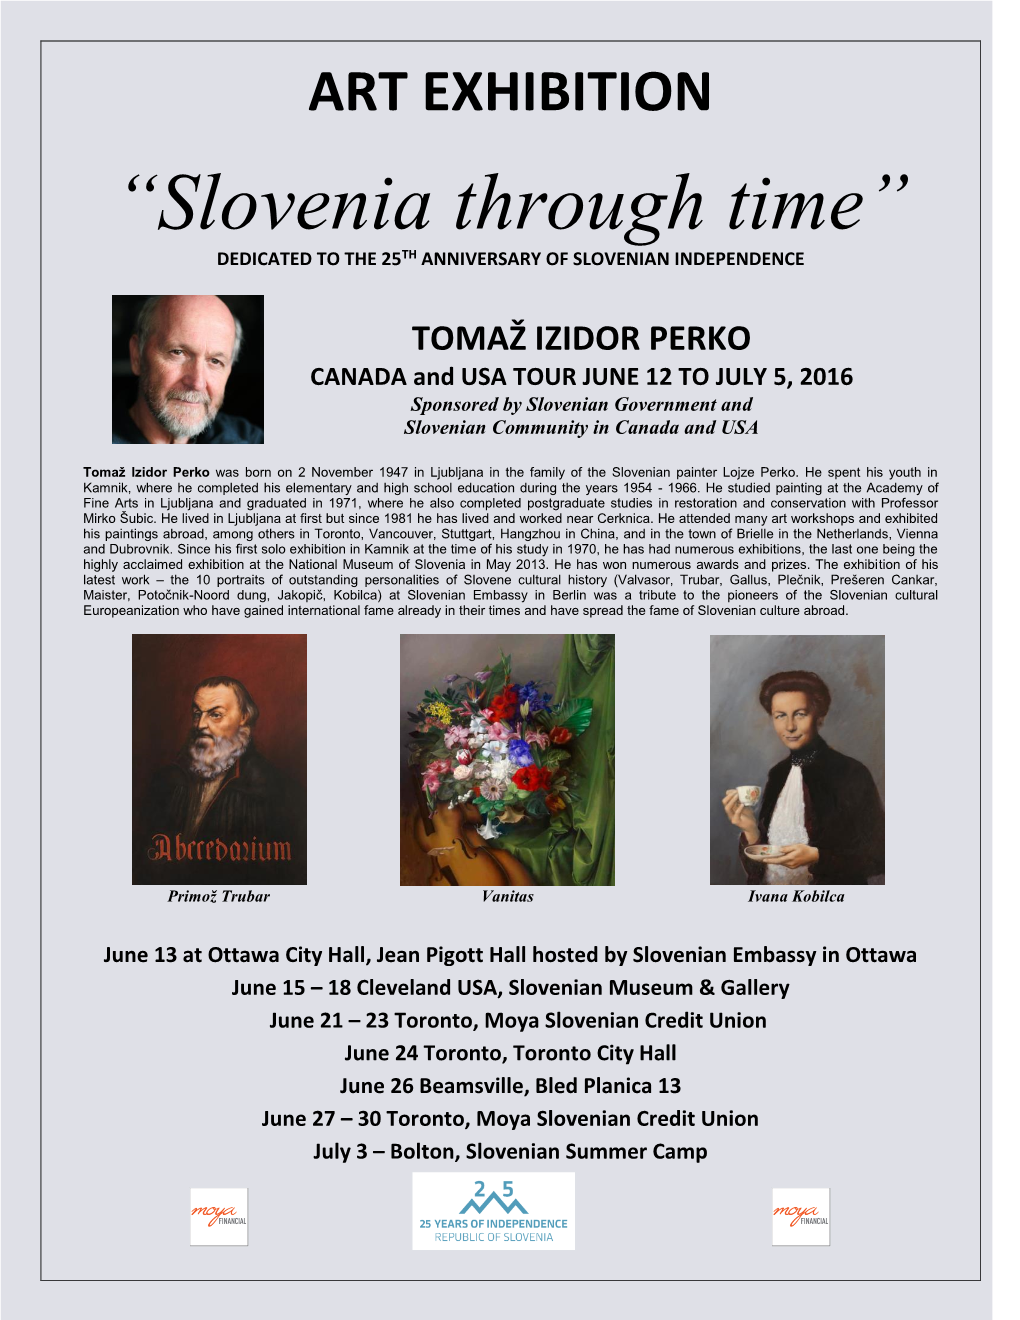 “Slovenia Through Time” DEDICATED to the 25TH ANNIVERSARY of SLOVENIAN INDEPENDENCE